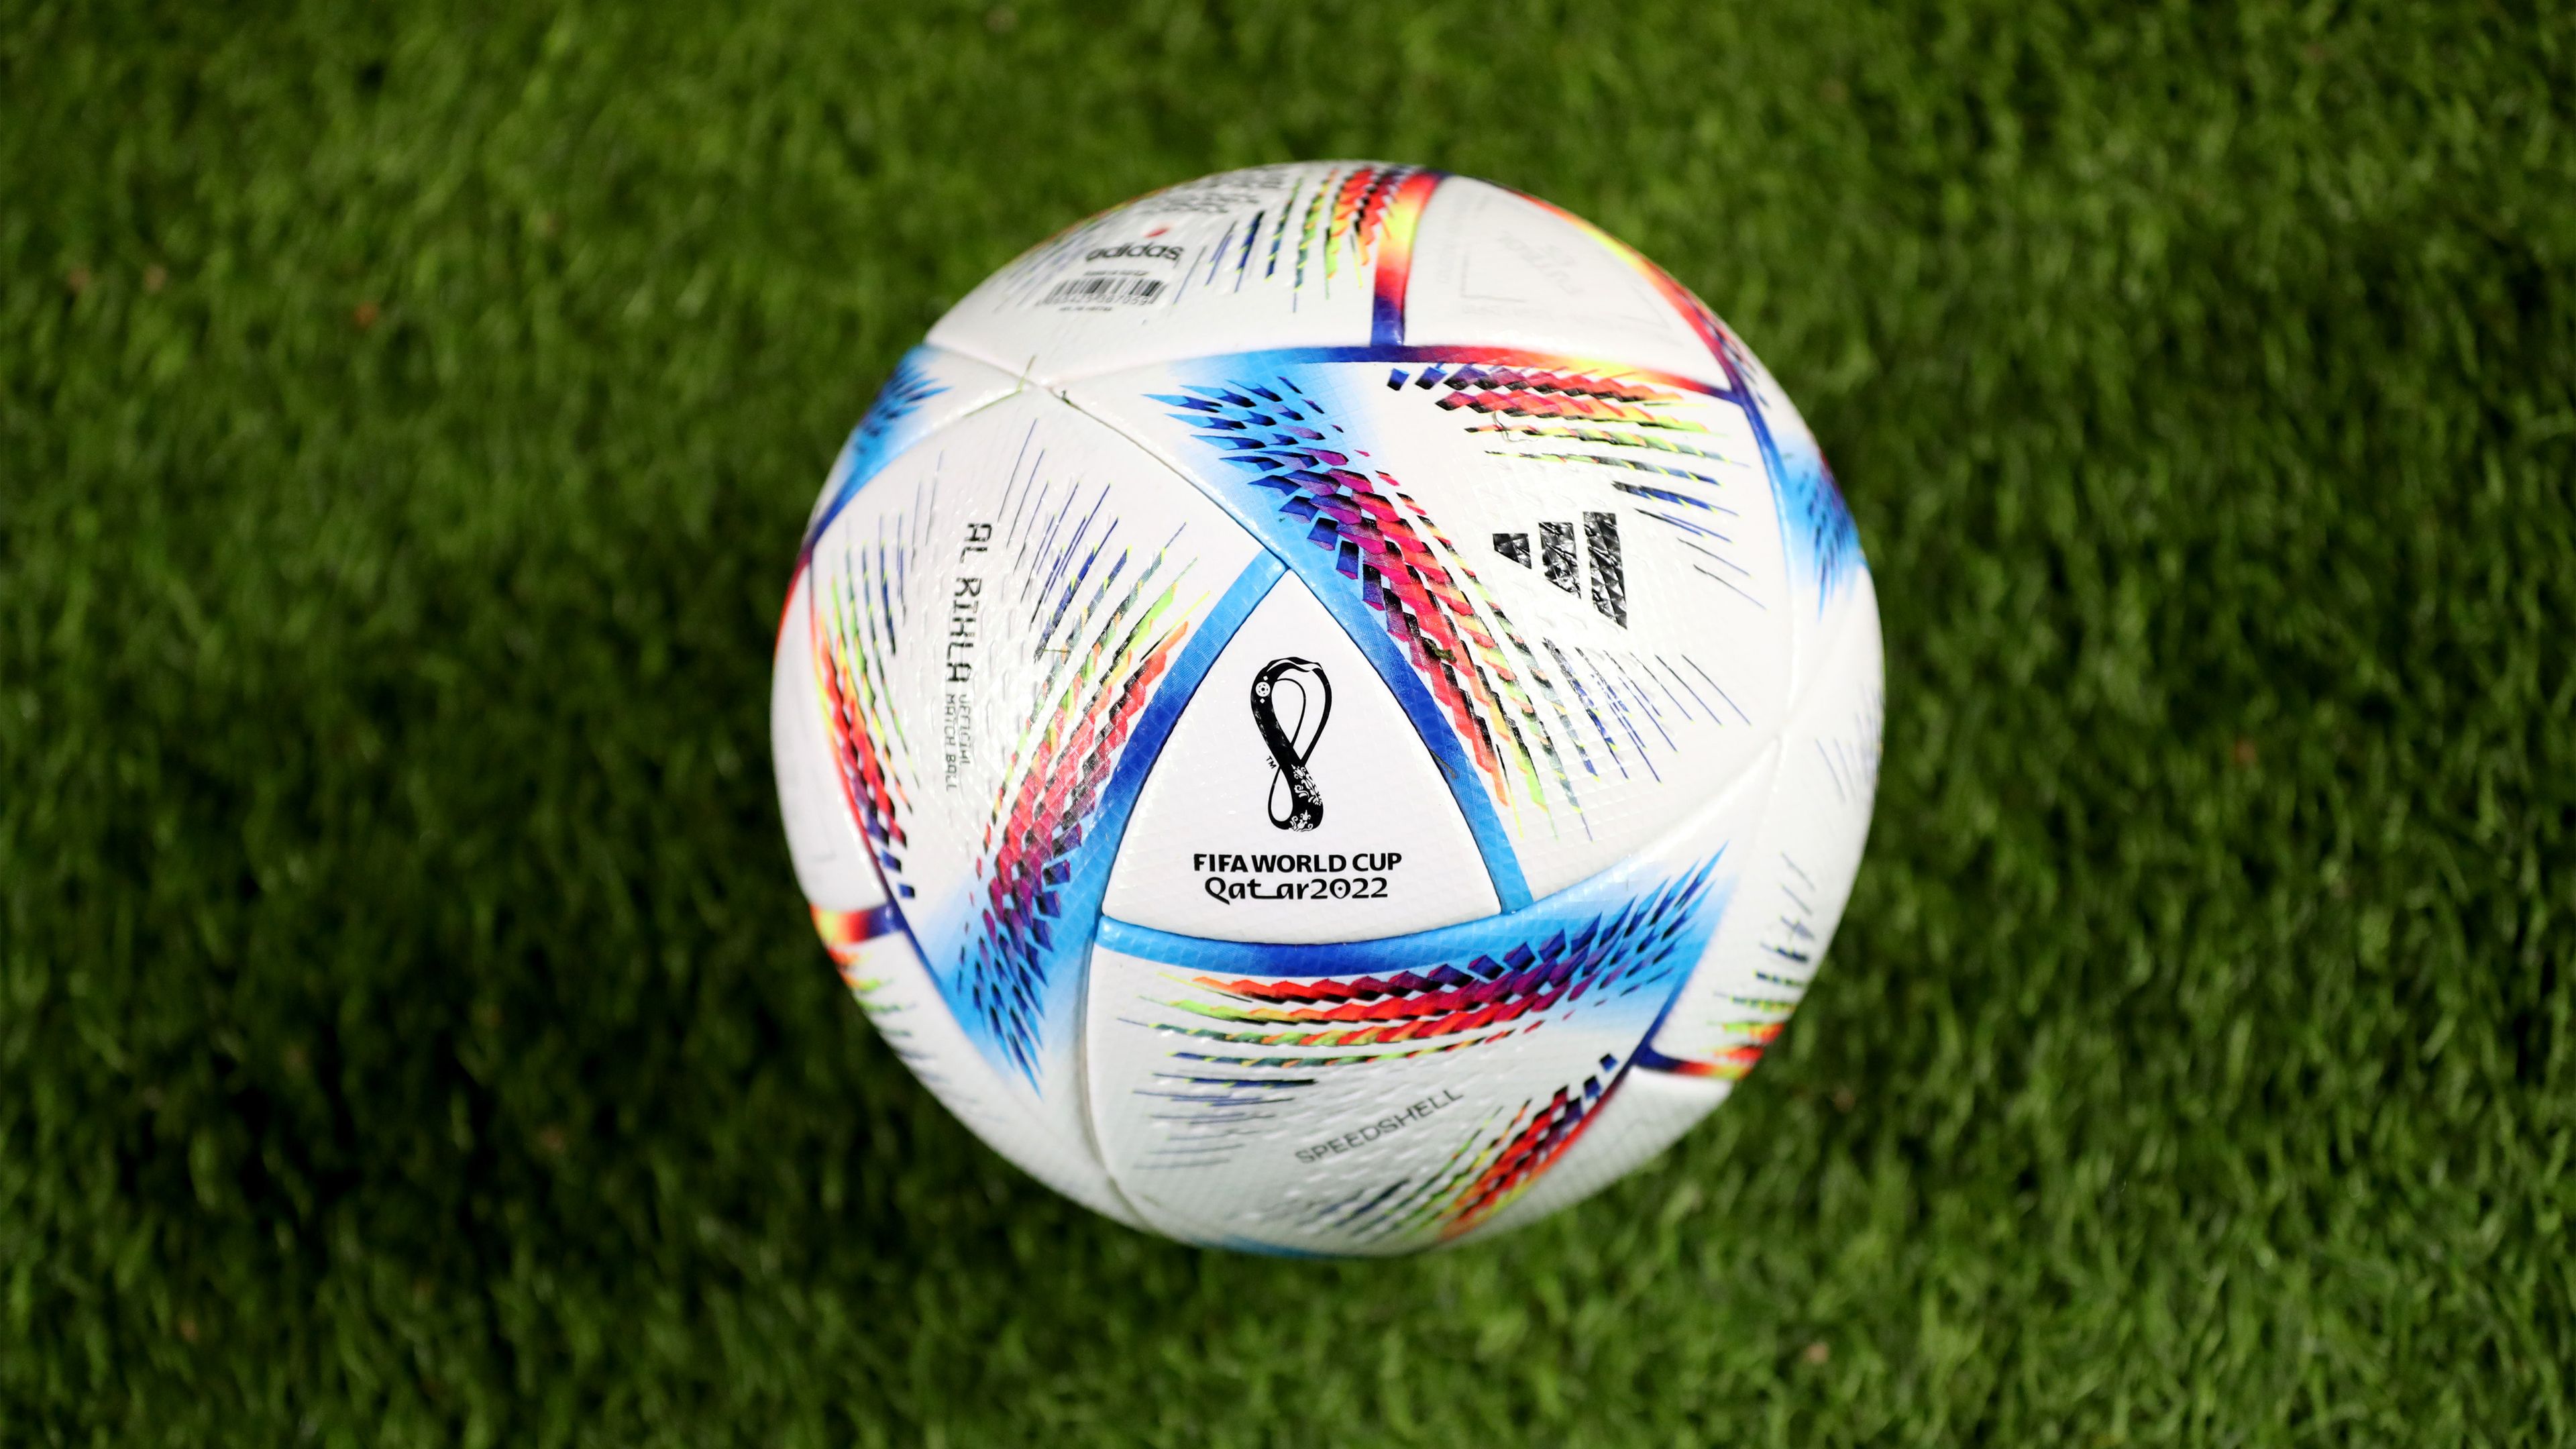 A deep dive into the creation of the Al Rihla - Adidas' new ball to be used at the 2022 FIFA World Cup in Qatar